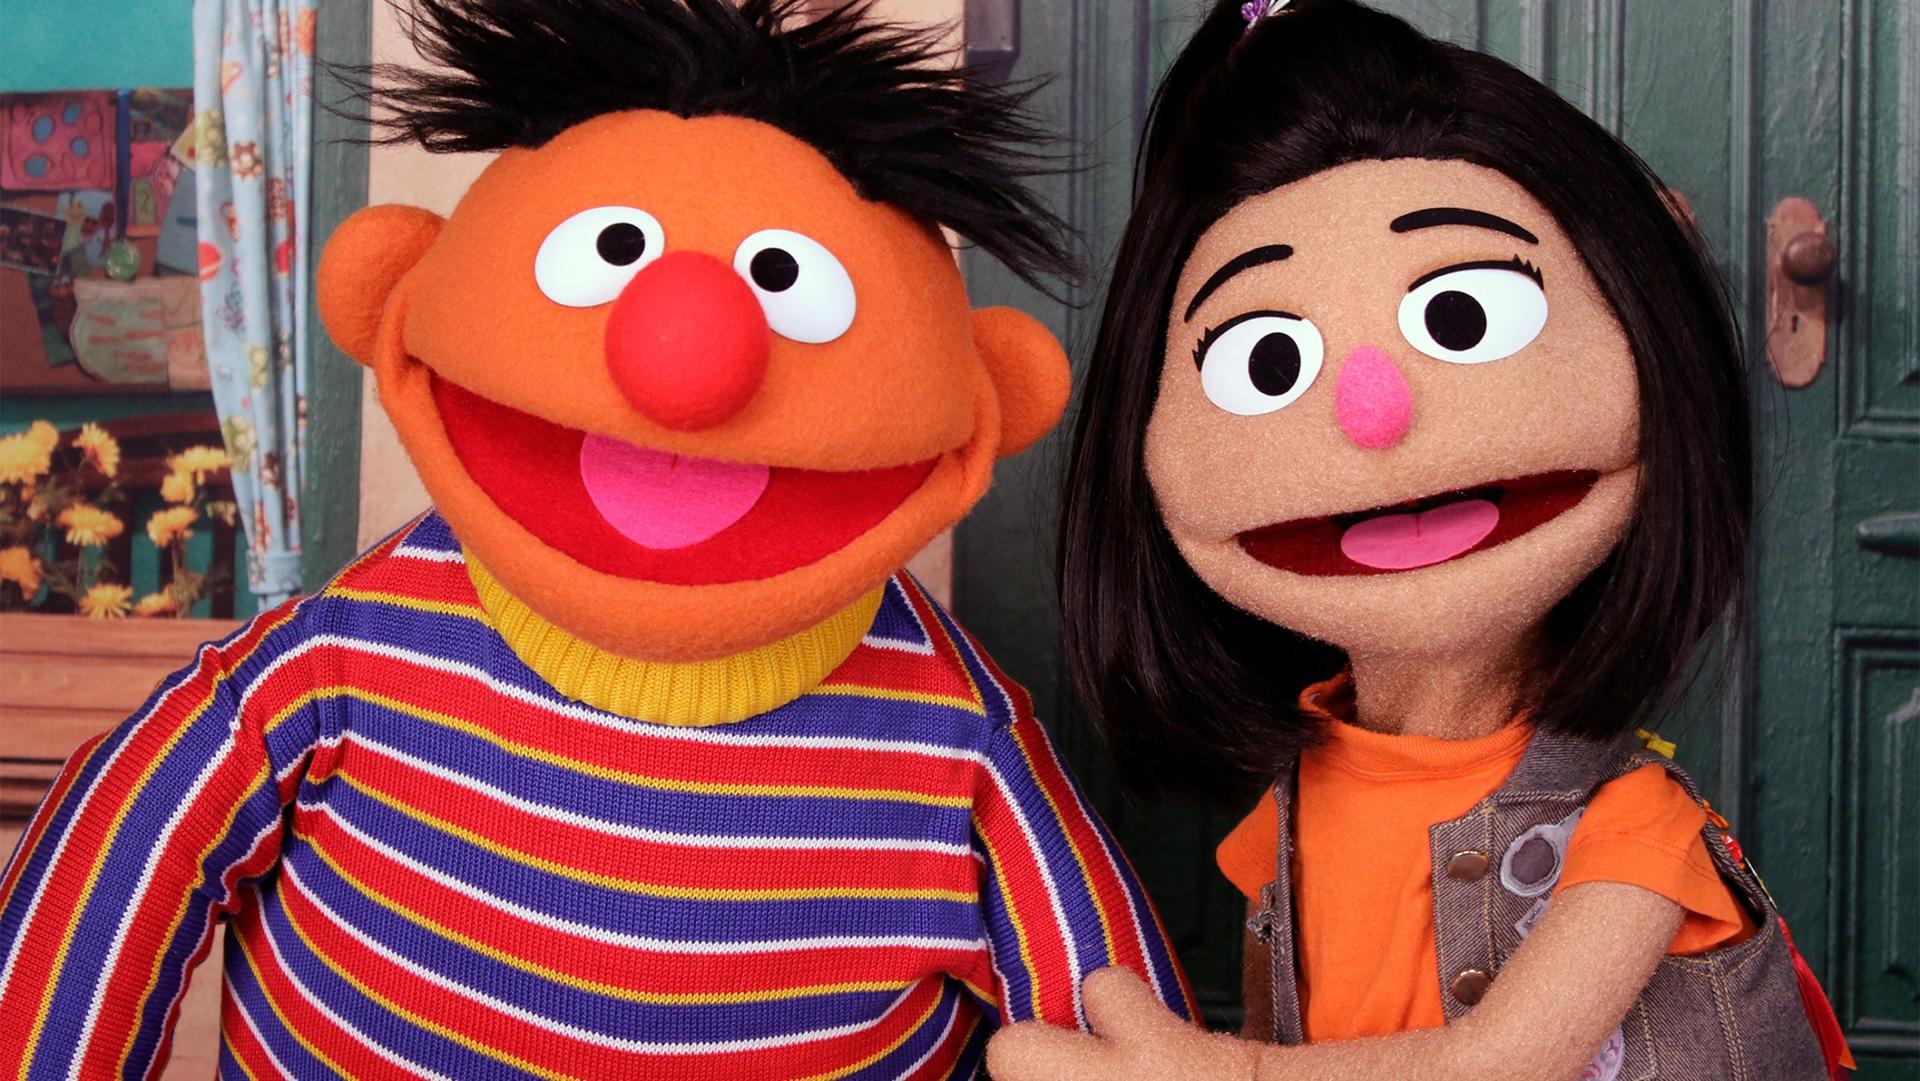 Ernie, a muppet from "Sesame Street," appears with new character Ji-Young, the first Asian American muppet, on the set of the long-running children's program in New York